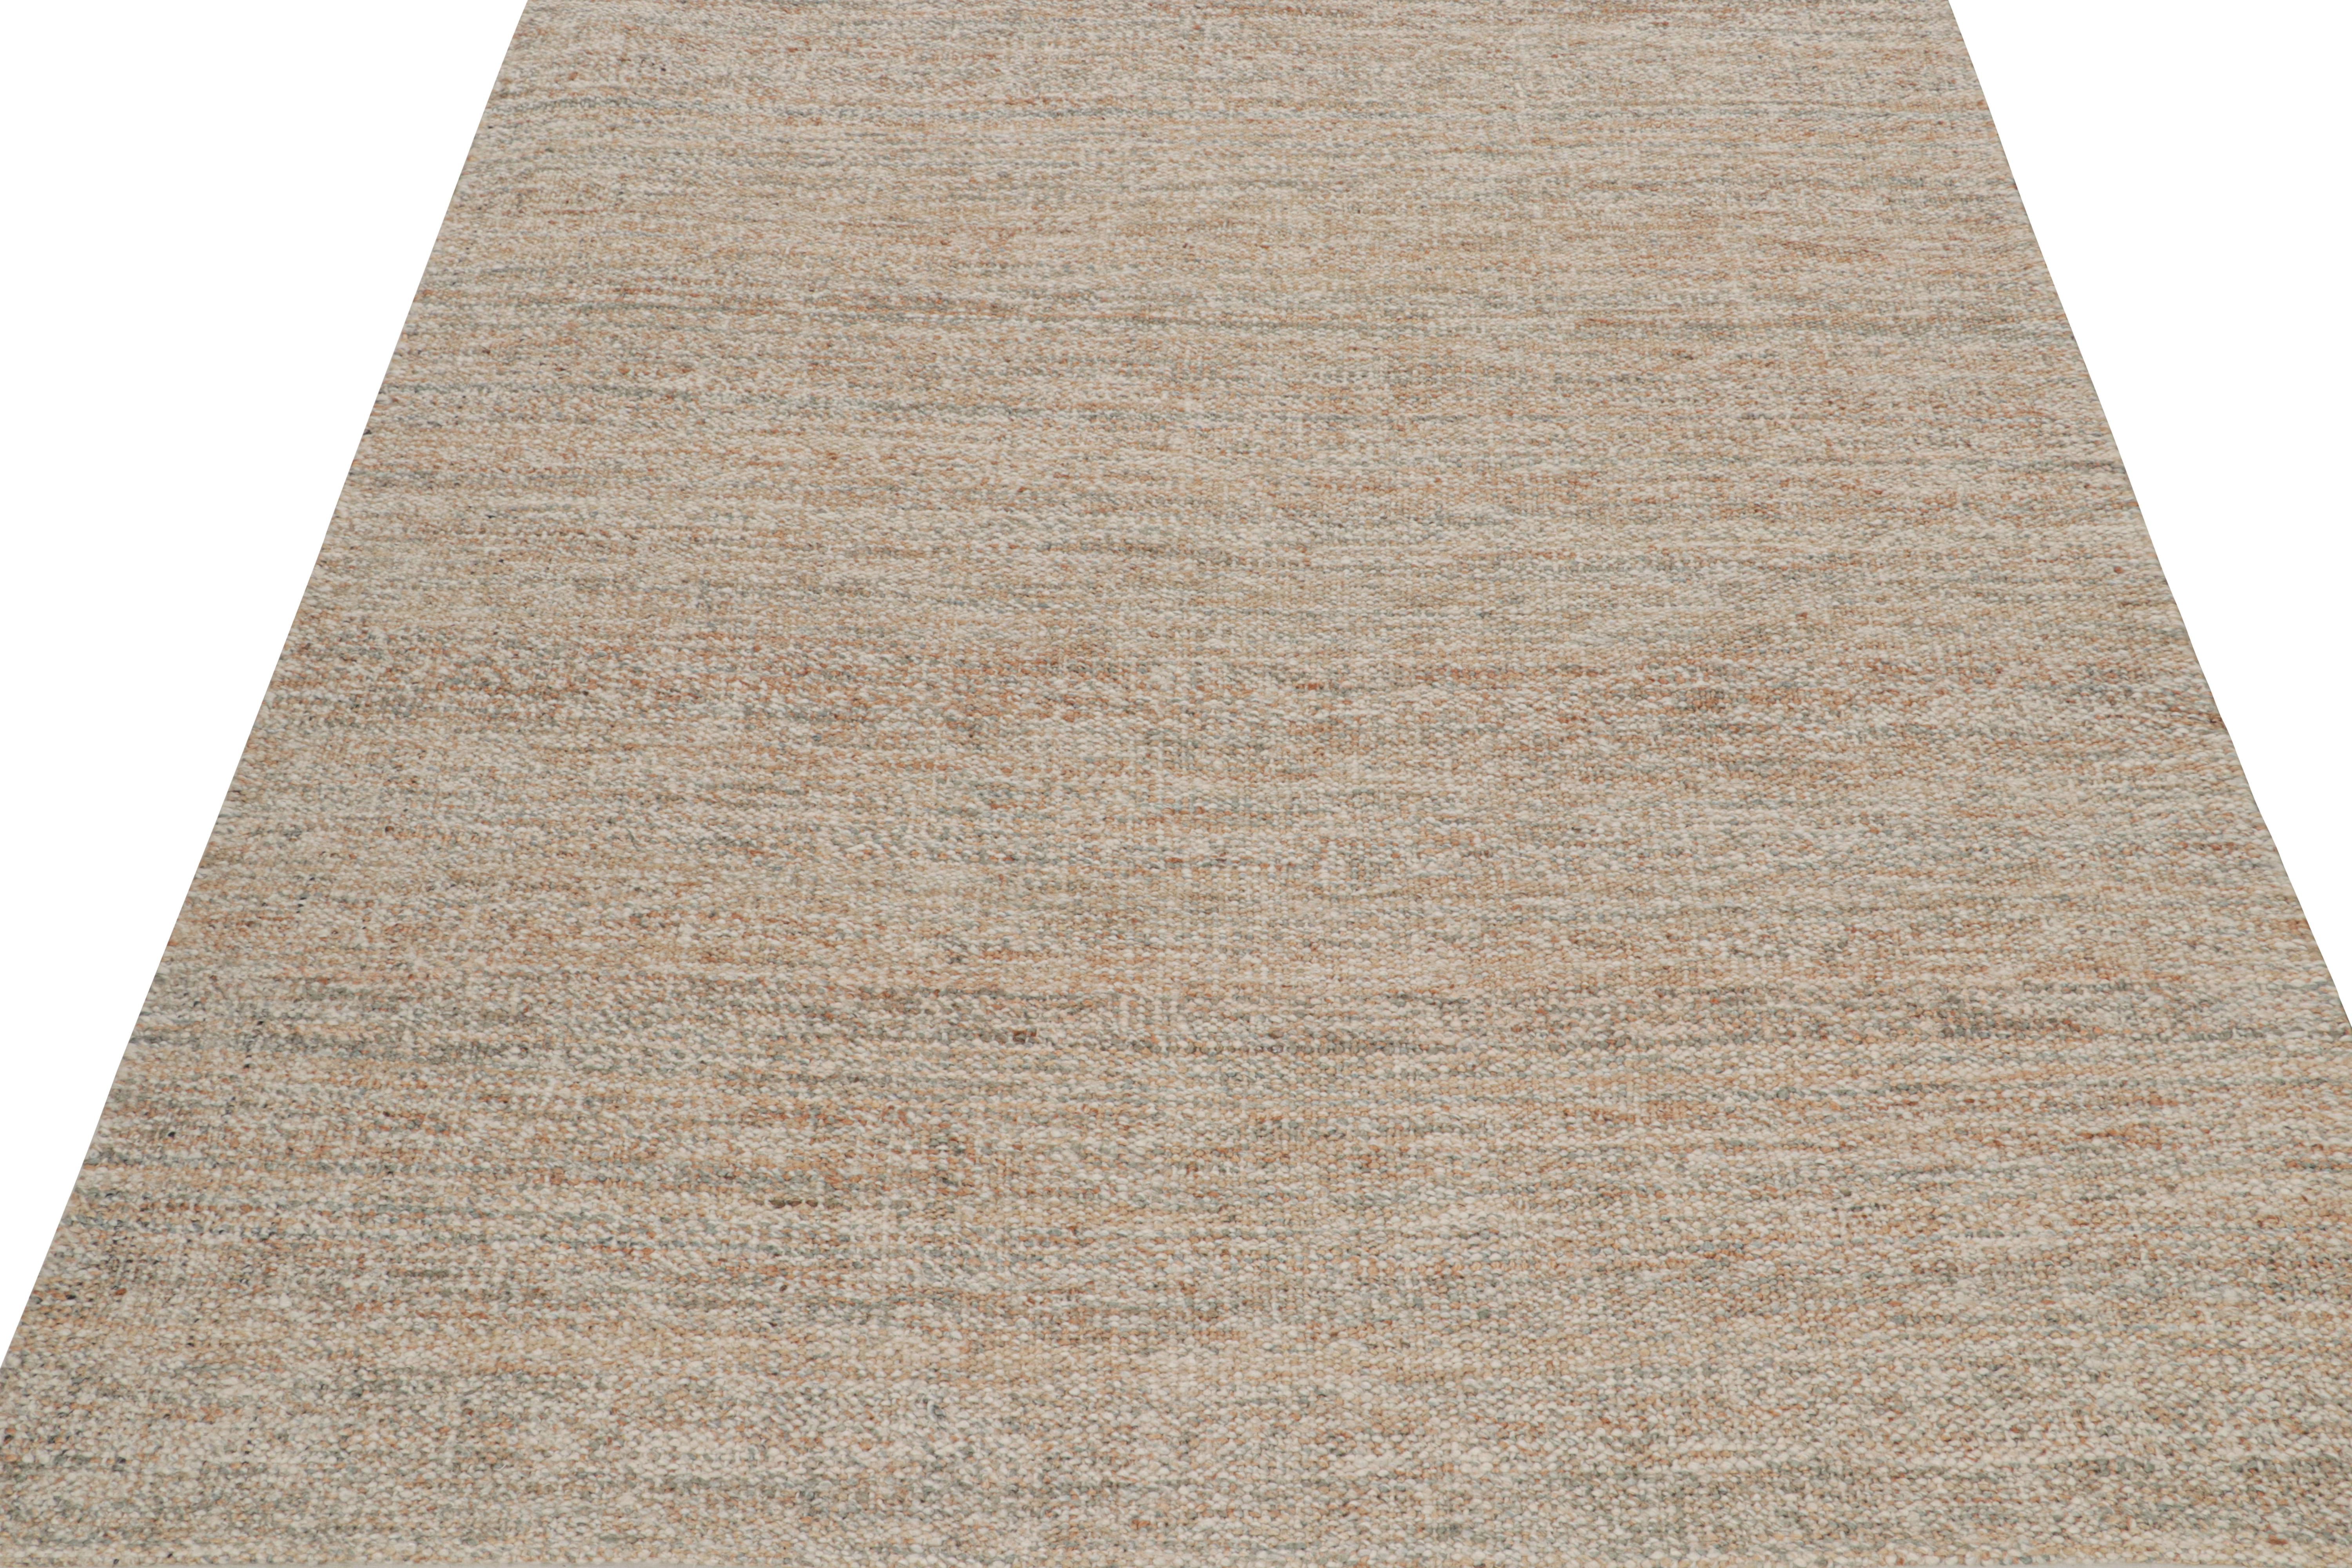 Hand-Knotted Rug & Kilim’s Contemporary Jute Kilim in Beige-Brown For Sale